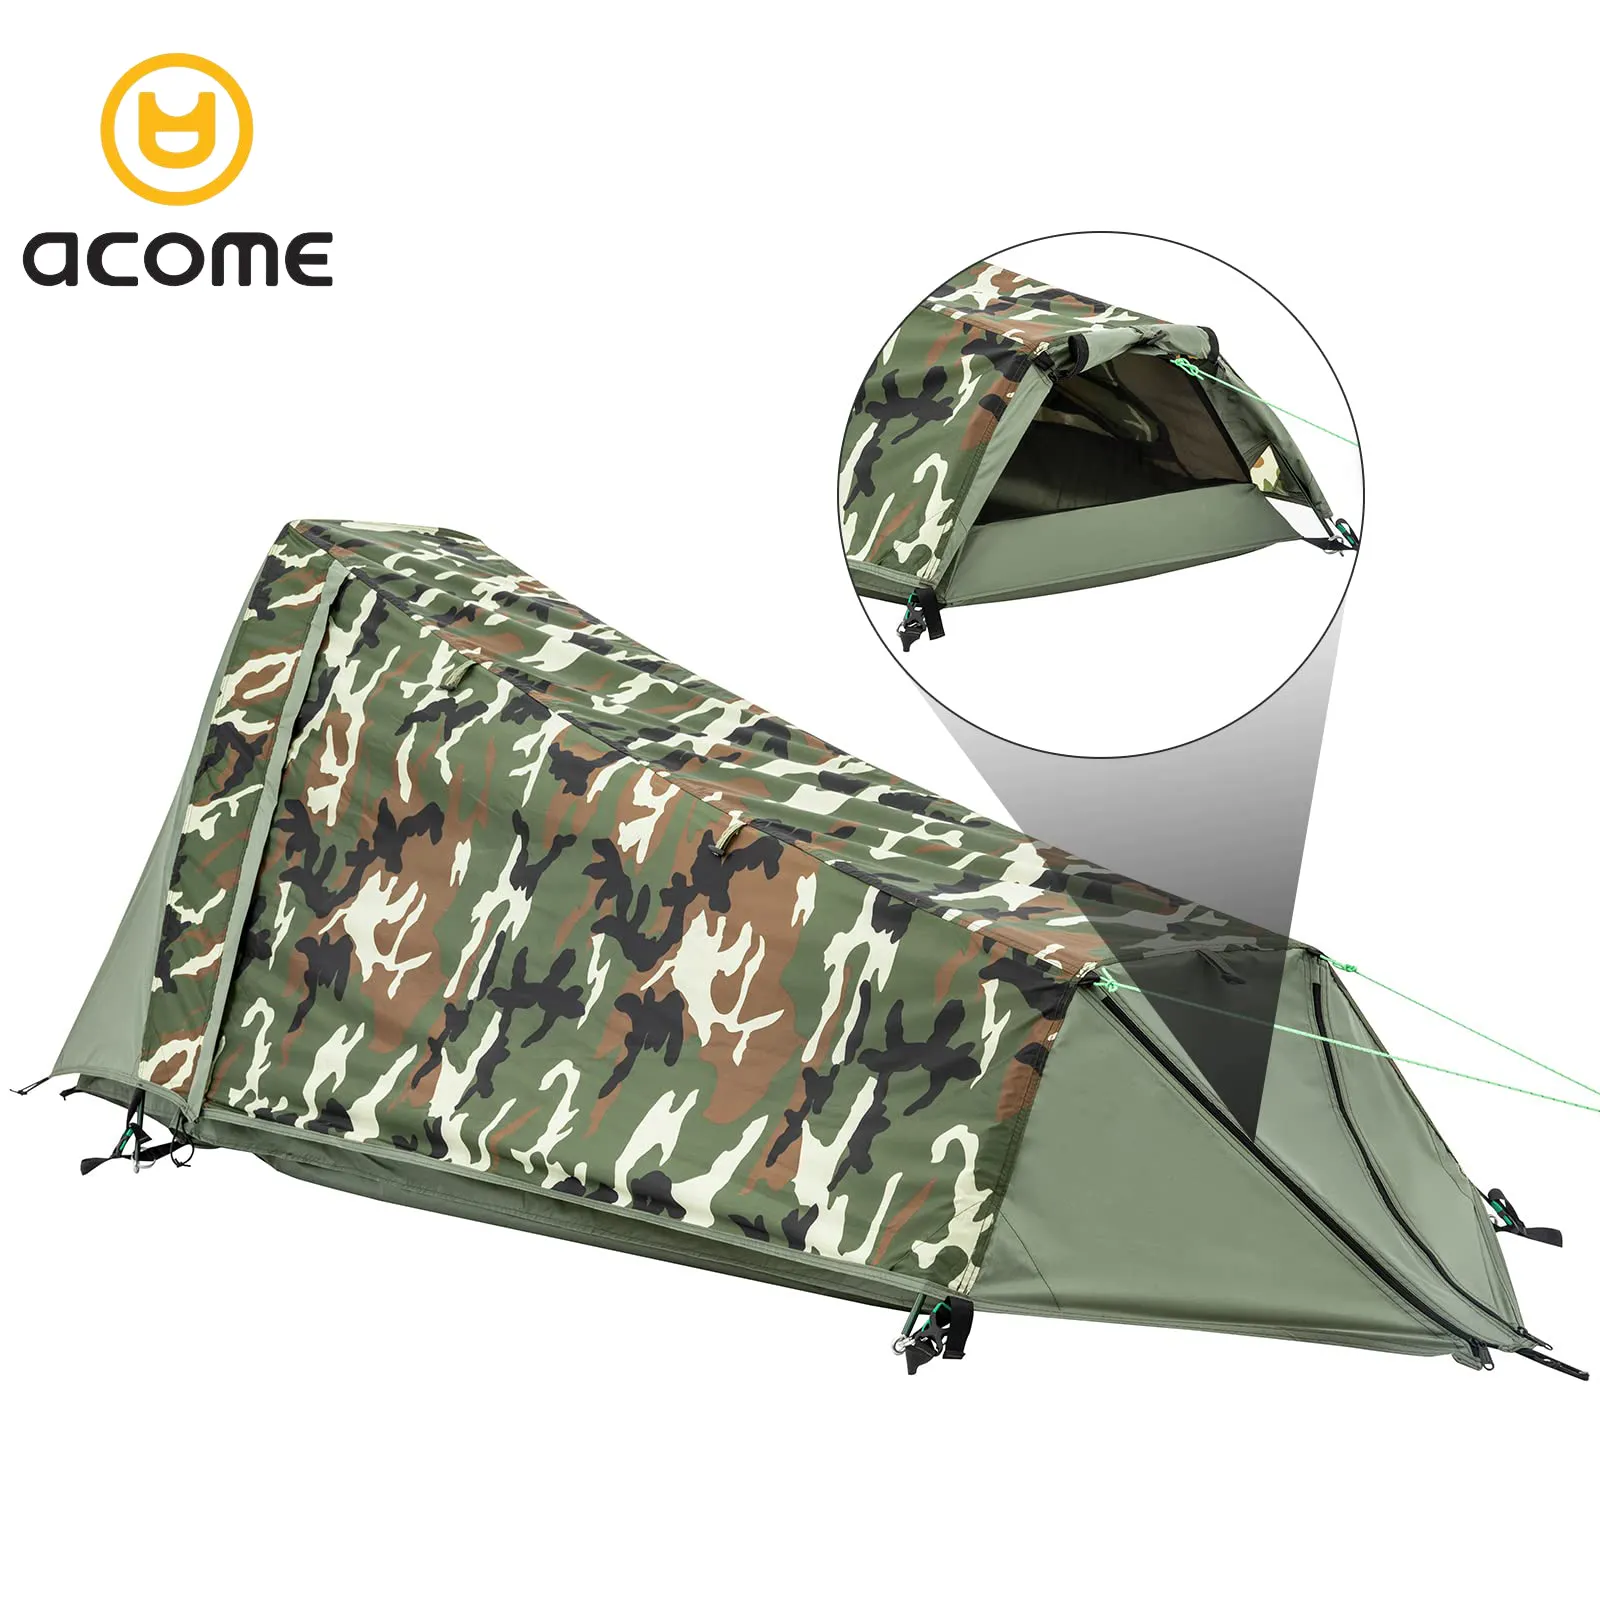 Acome Hot Selling OEM Outdoor Hiking Camping Double Swag Tent Waterproof Portable Canvas Swag Tent Australia